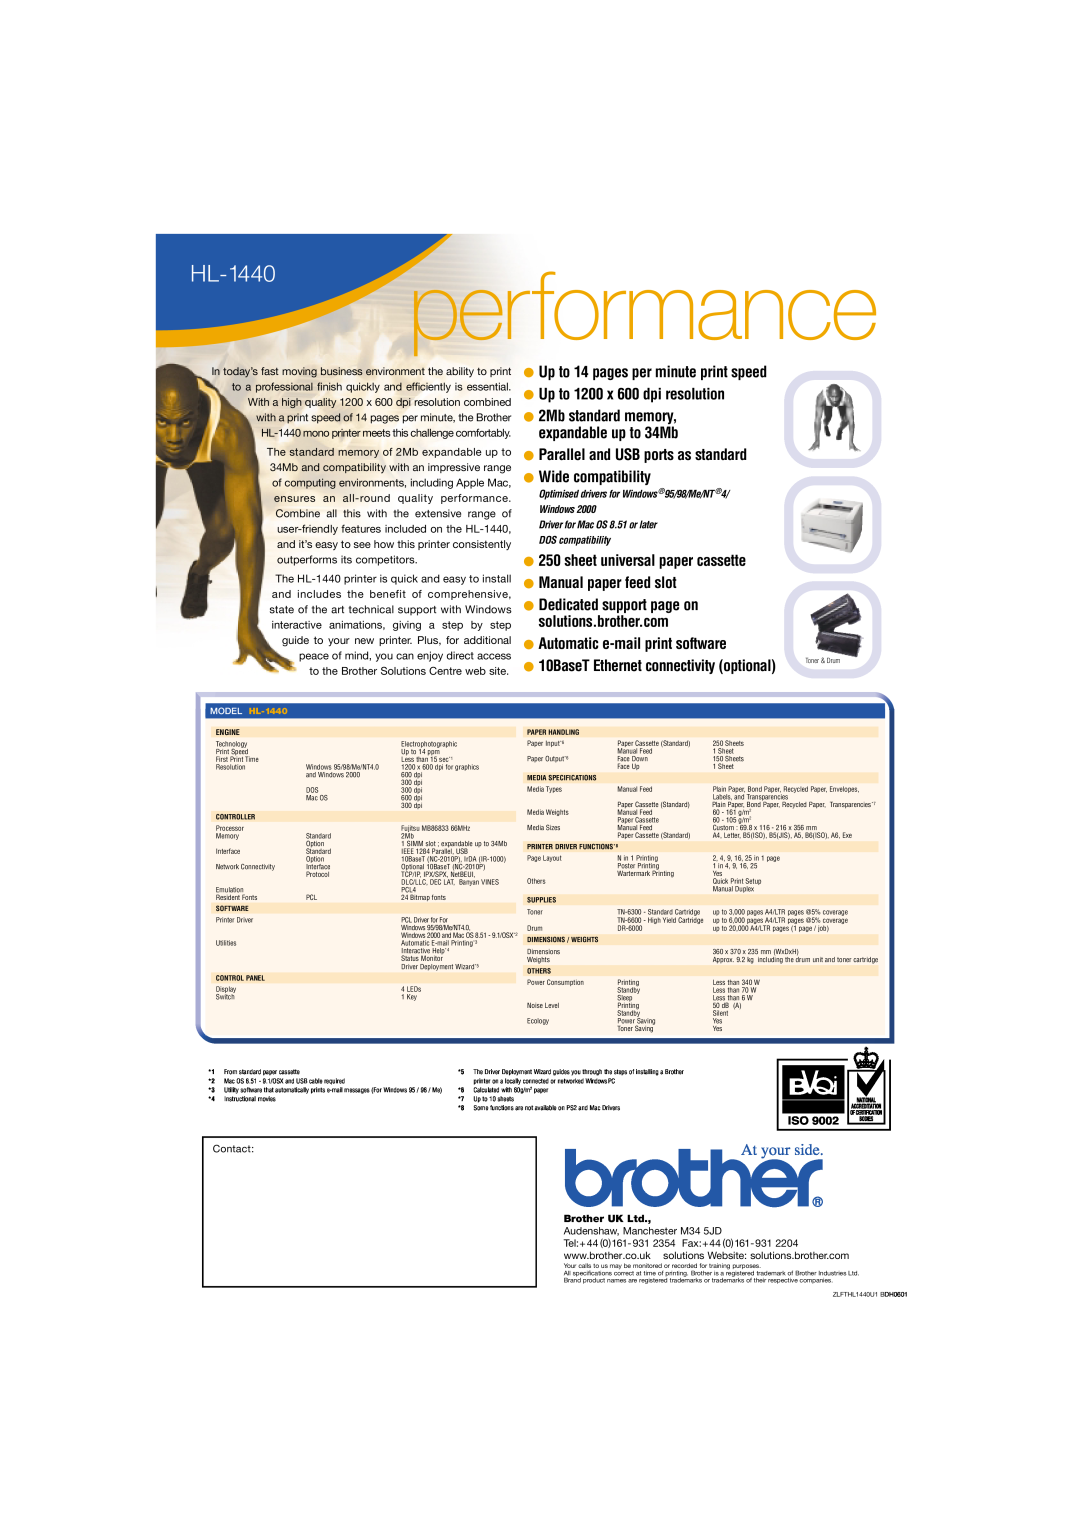 Brother HL-1440 2Mb standard memory, expandable up to 34Mb, Dedicated support page on solutions.brother.com, performance 